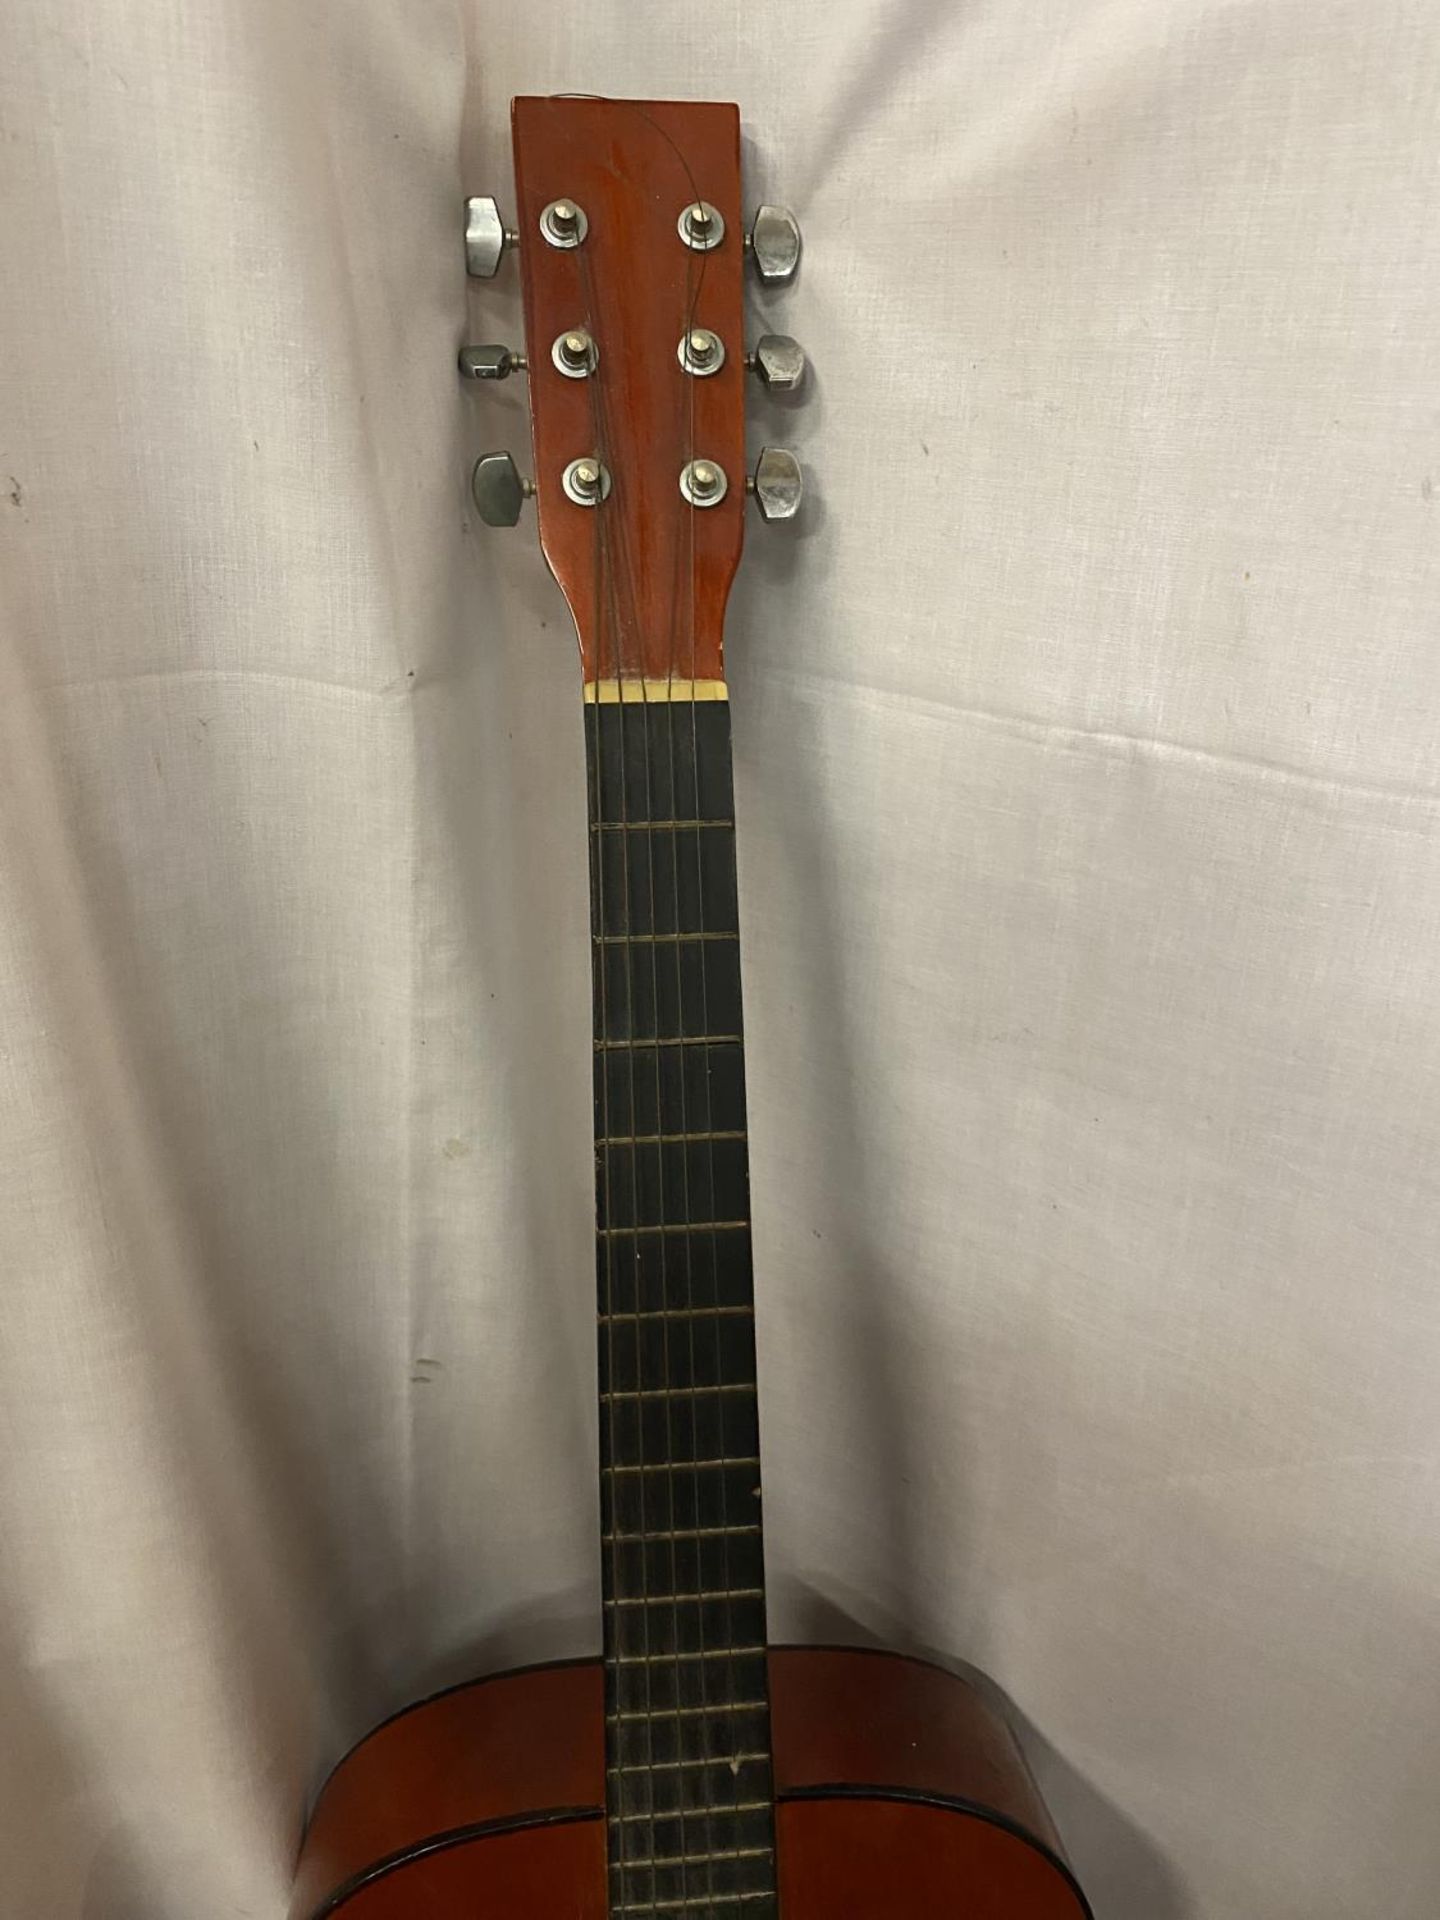 AN ACCOUSTIC GUITAR. (ONLY 5 STRINGS) - Image 2 of 4